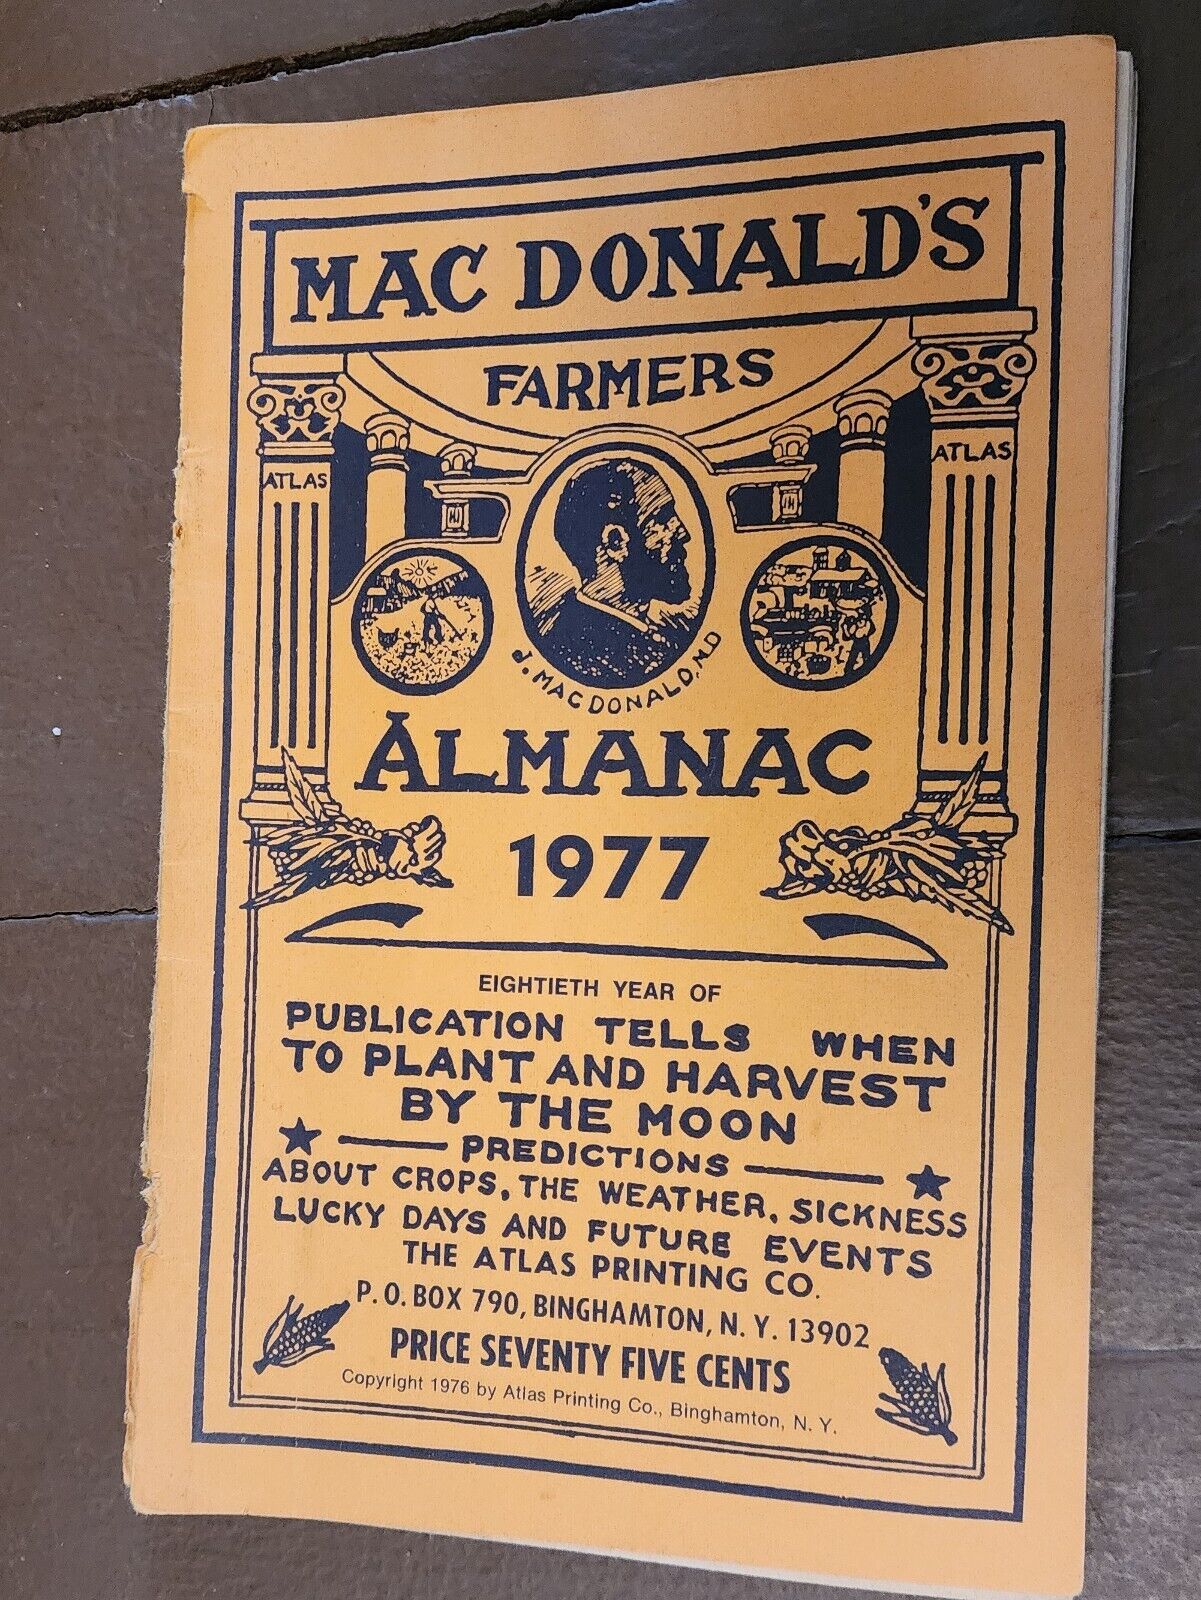 VIntage Mac Donald\'s Farmers Almanac Book Collectable - Great Gift - Choose Year